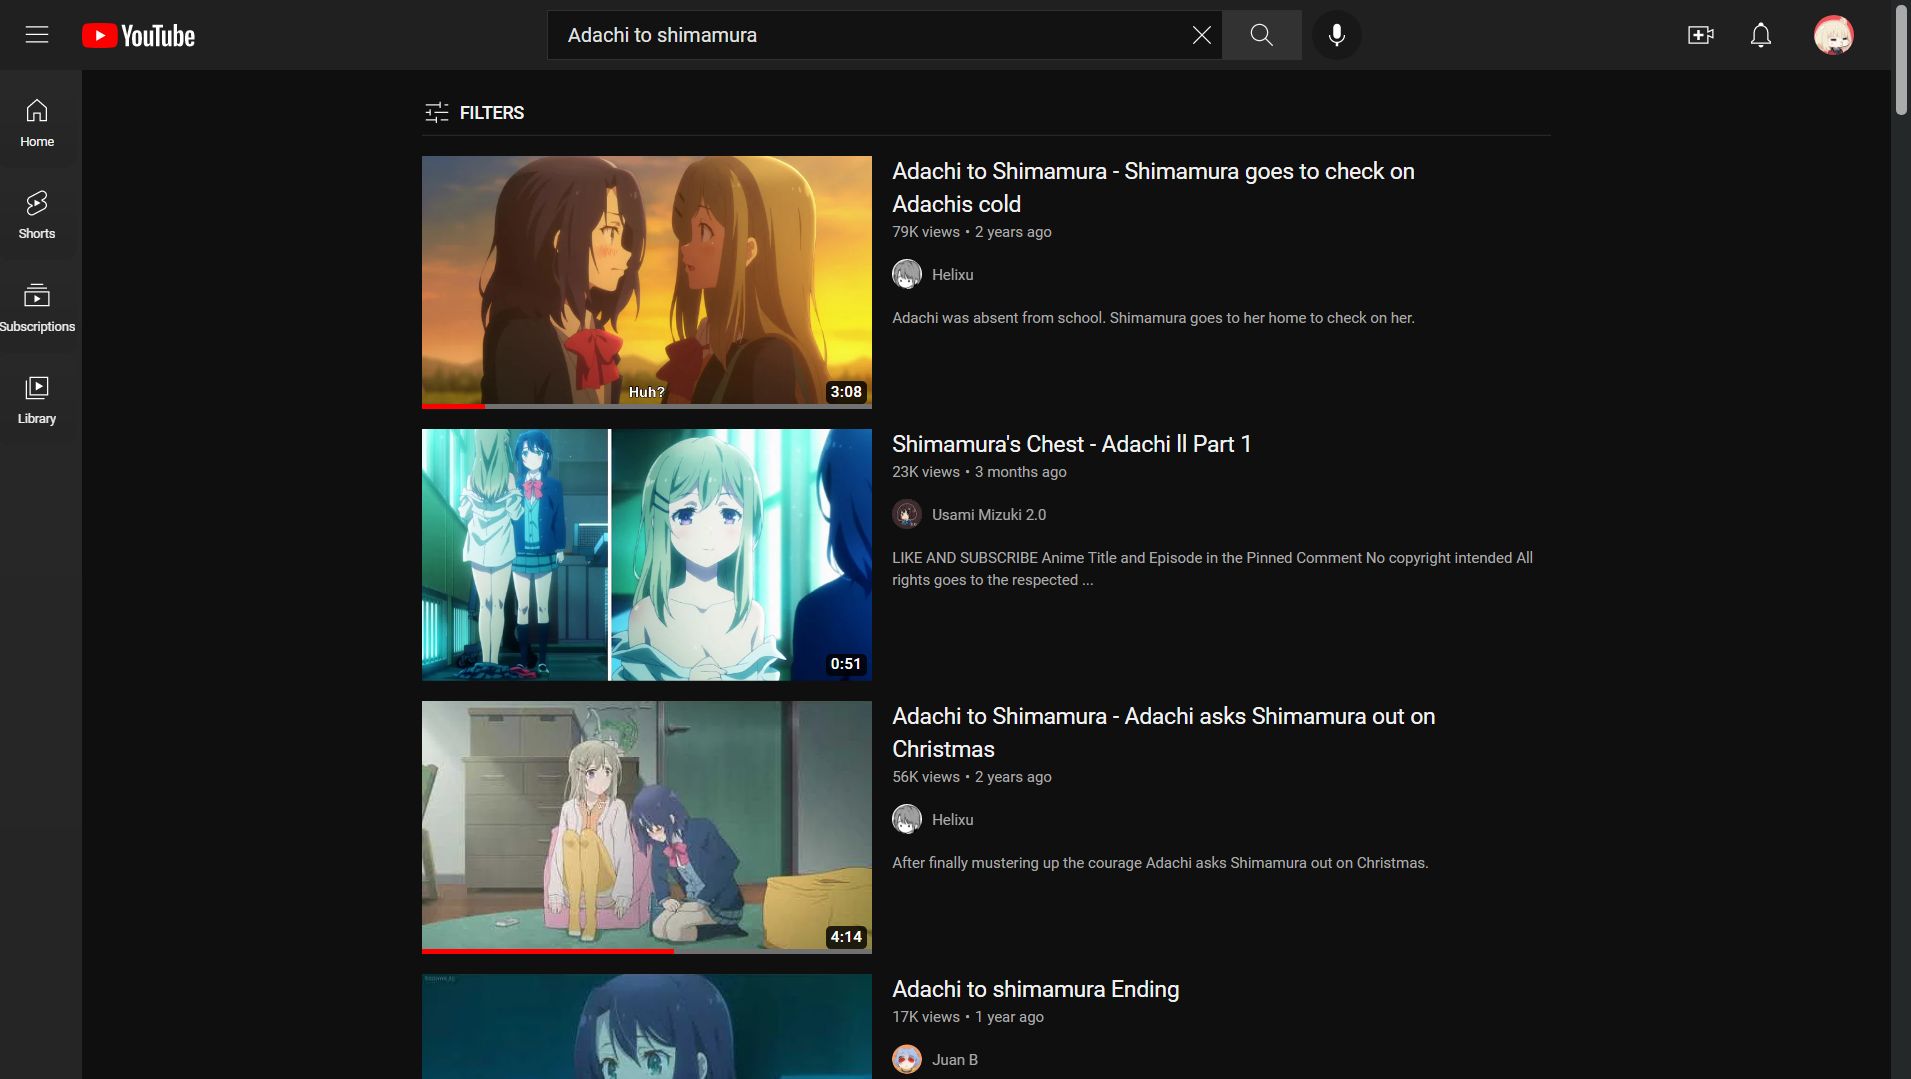 Youtube - Centered the search results screenshot